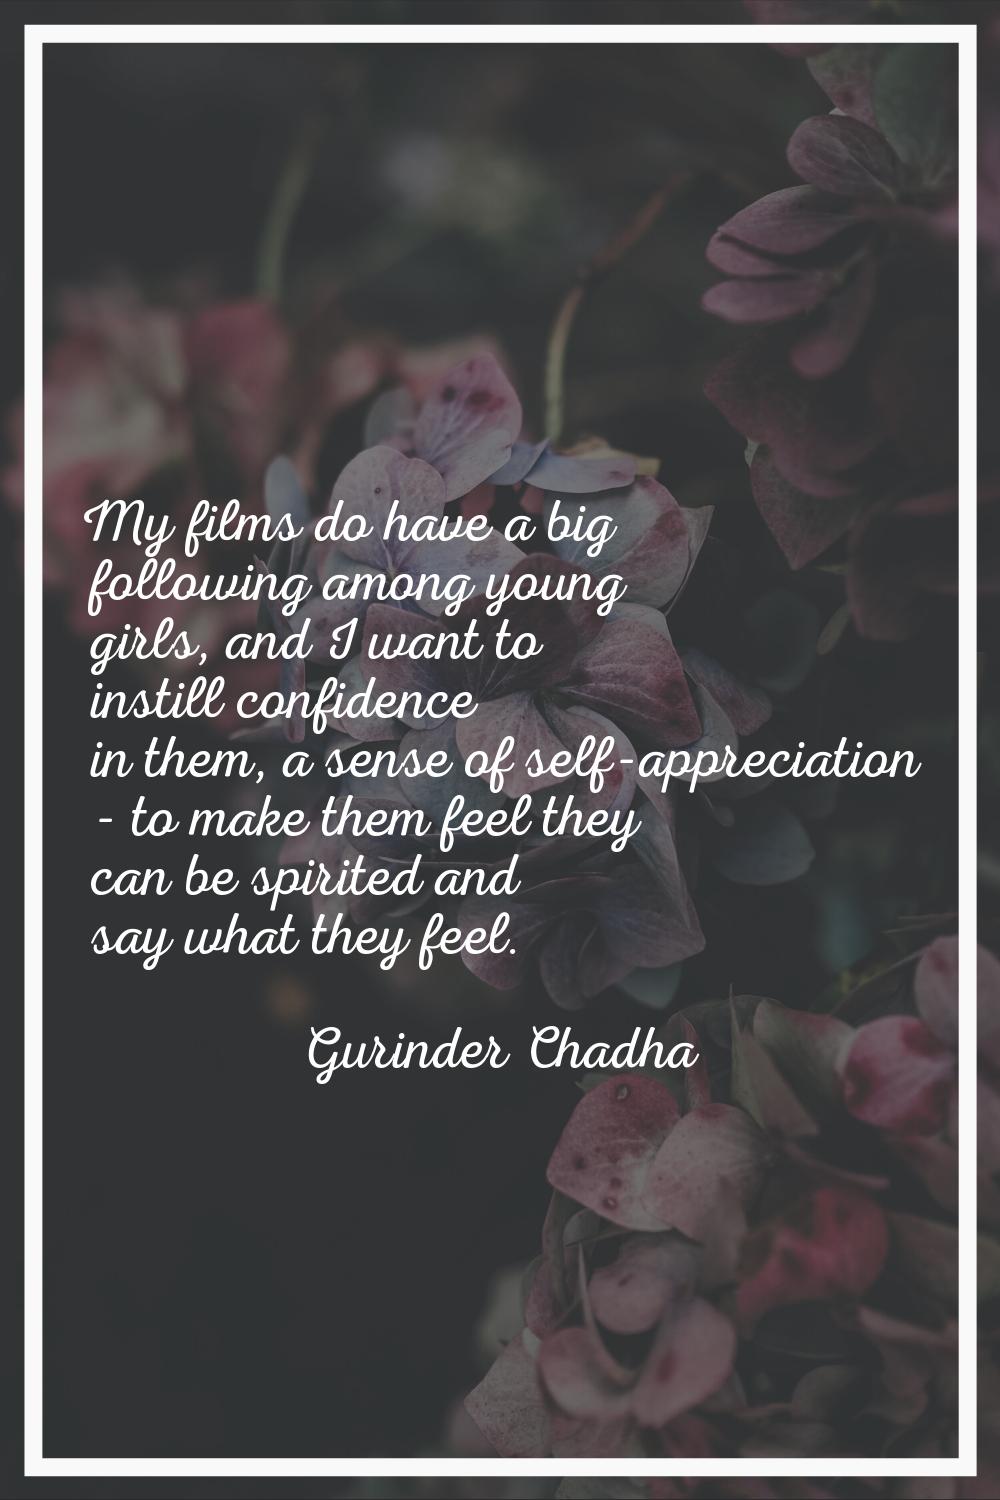 My films do have a big following among young girls, and I want to instill confidence in them, a sen